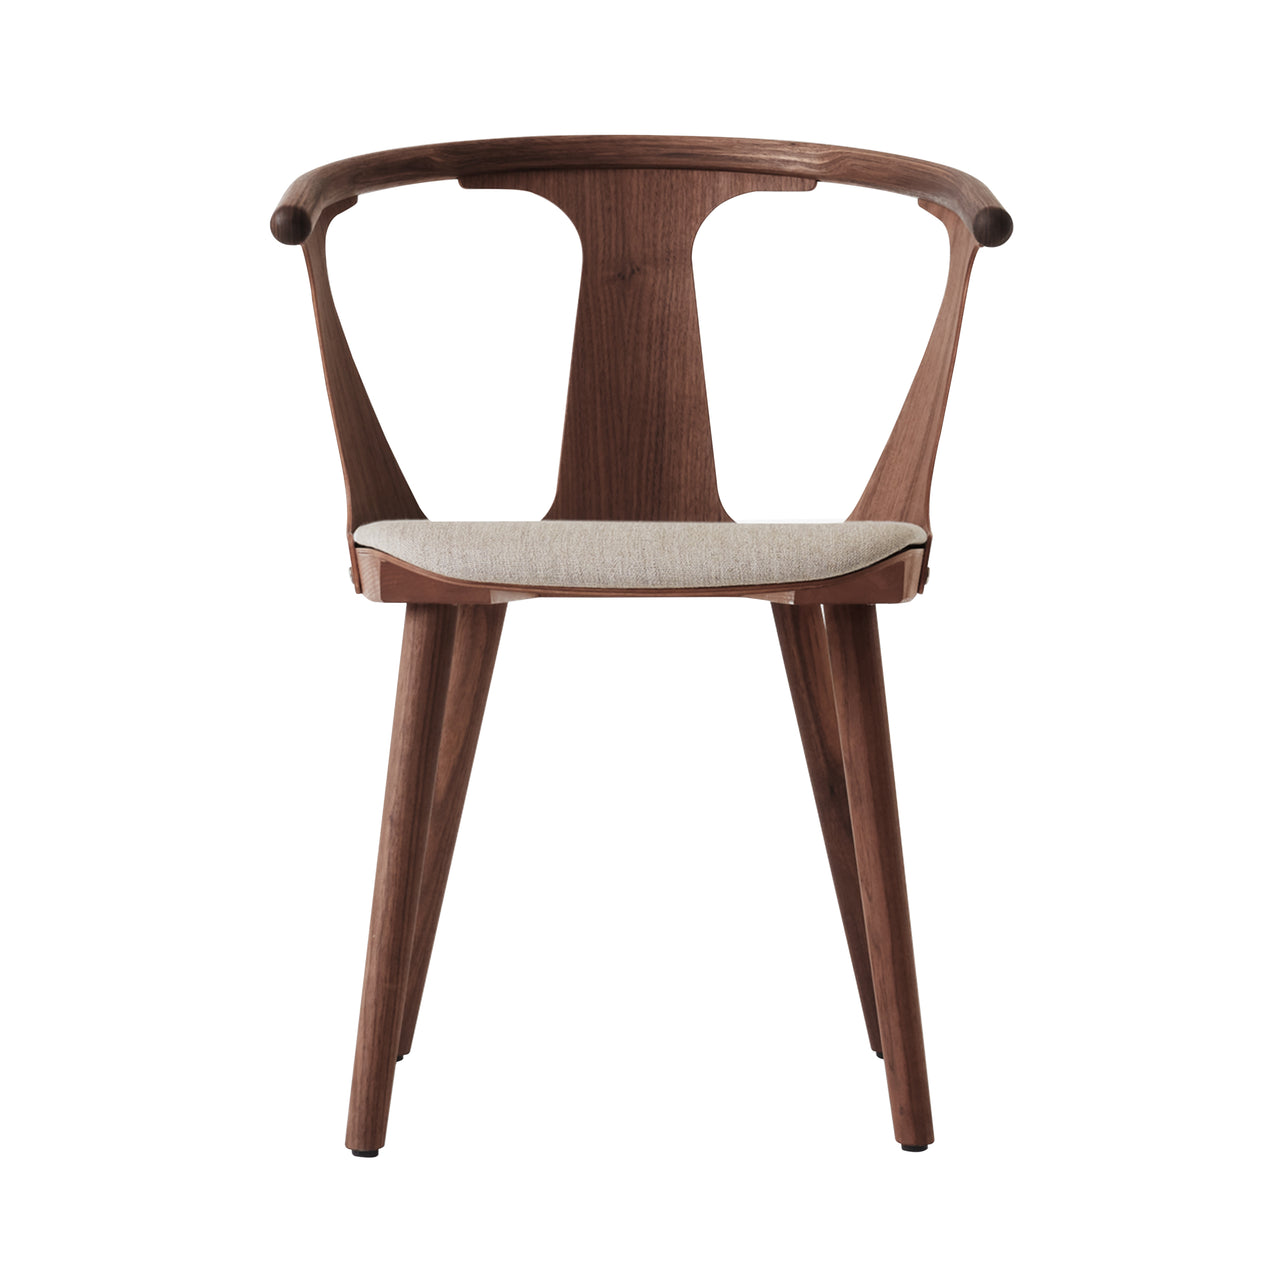 In Between Chair SK2: Upholstered + Oiled Walnut